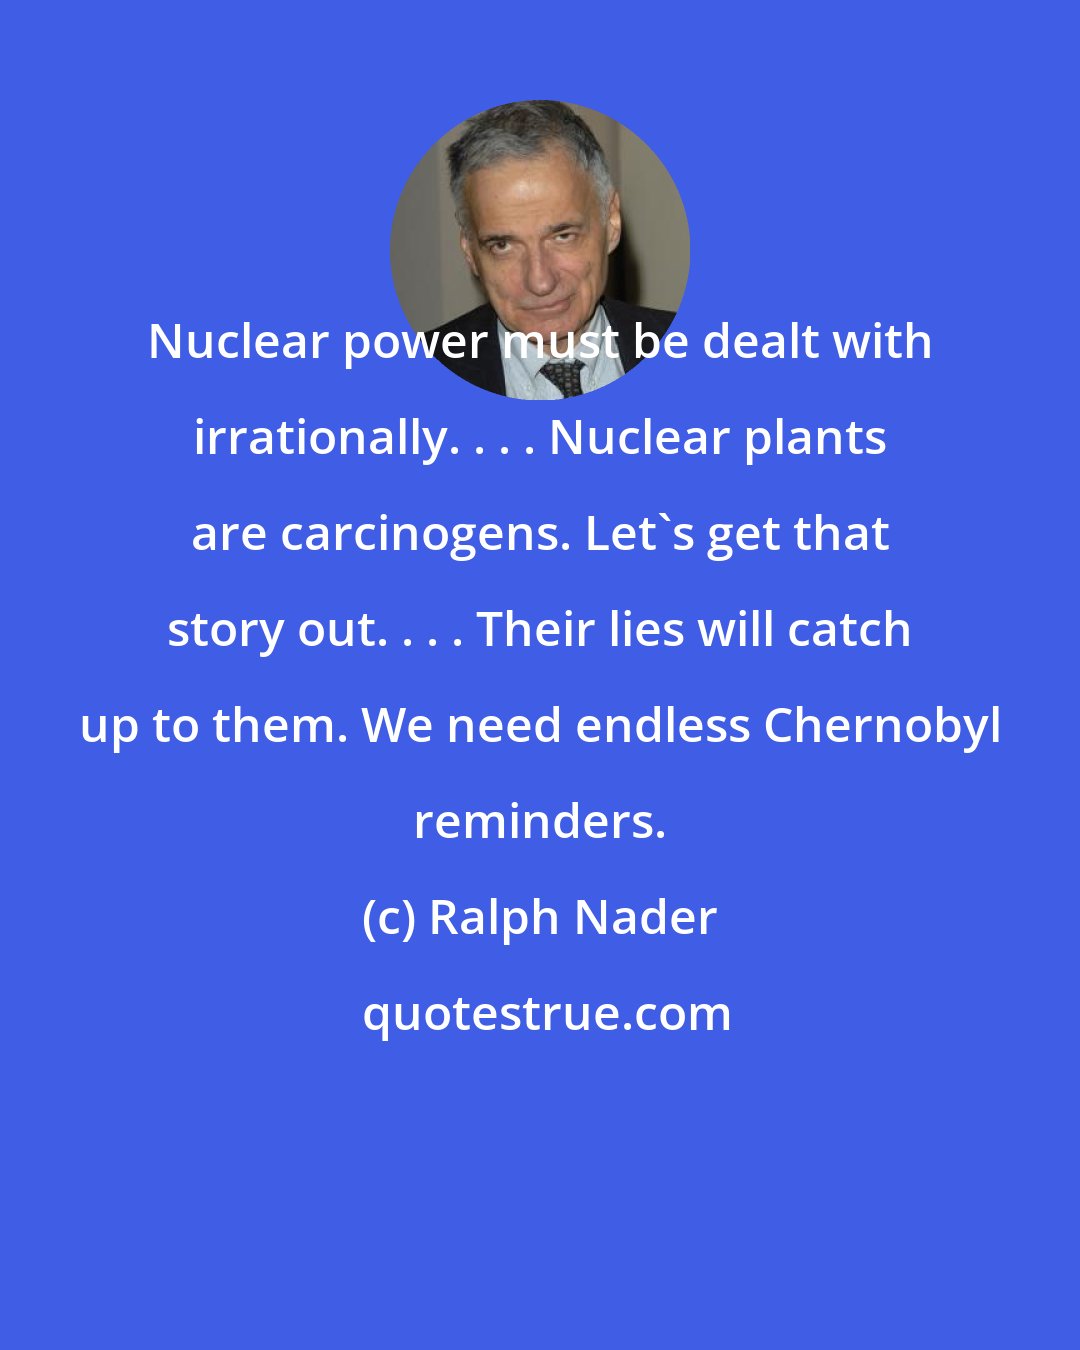 Ralph Nader: Nuclear power must be dealt with irrationally. . . . Nuclear plants are carcinogens. Let's get that story out. . . . Their lies will catch up to them. We need endless Chernobyl reminders.